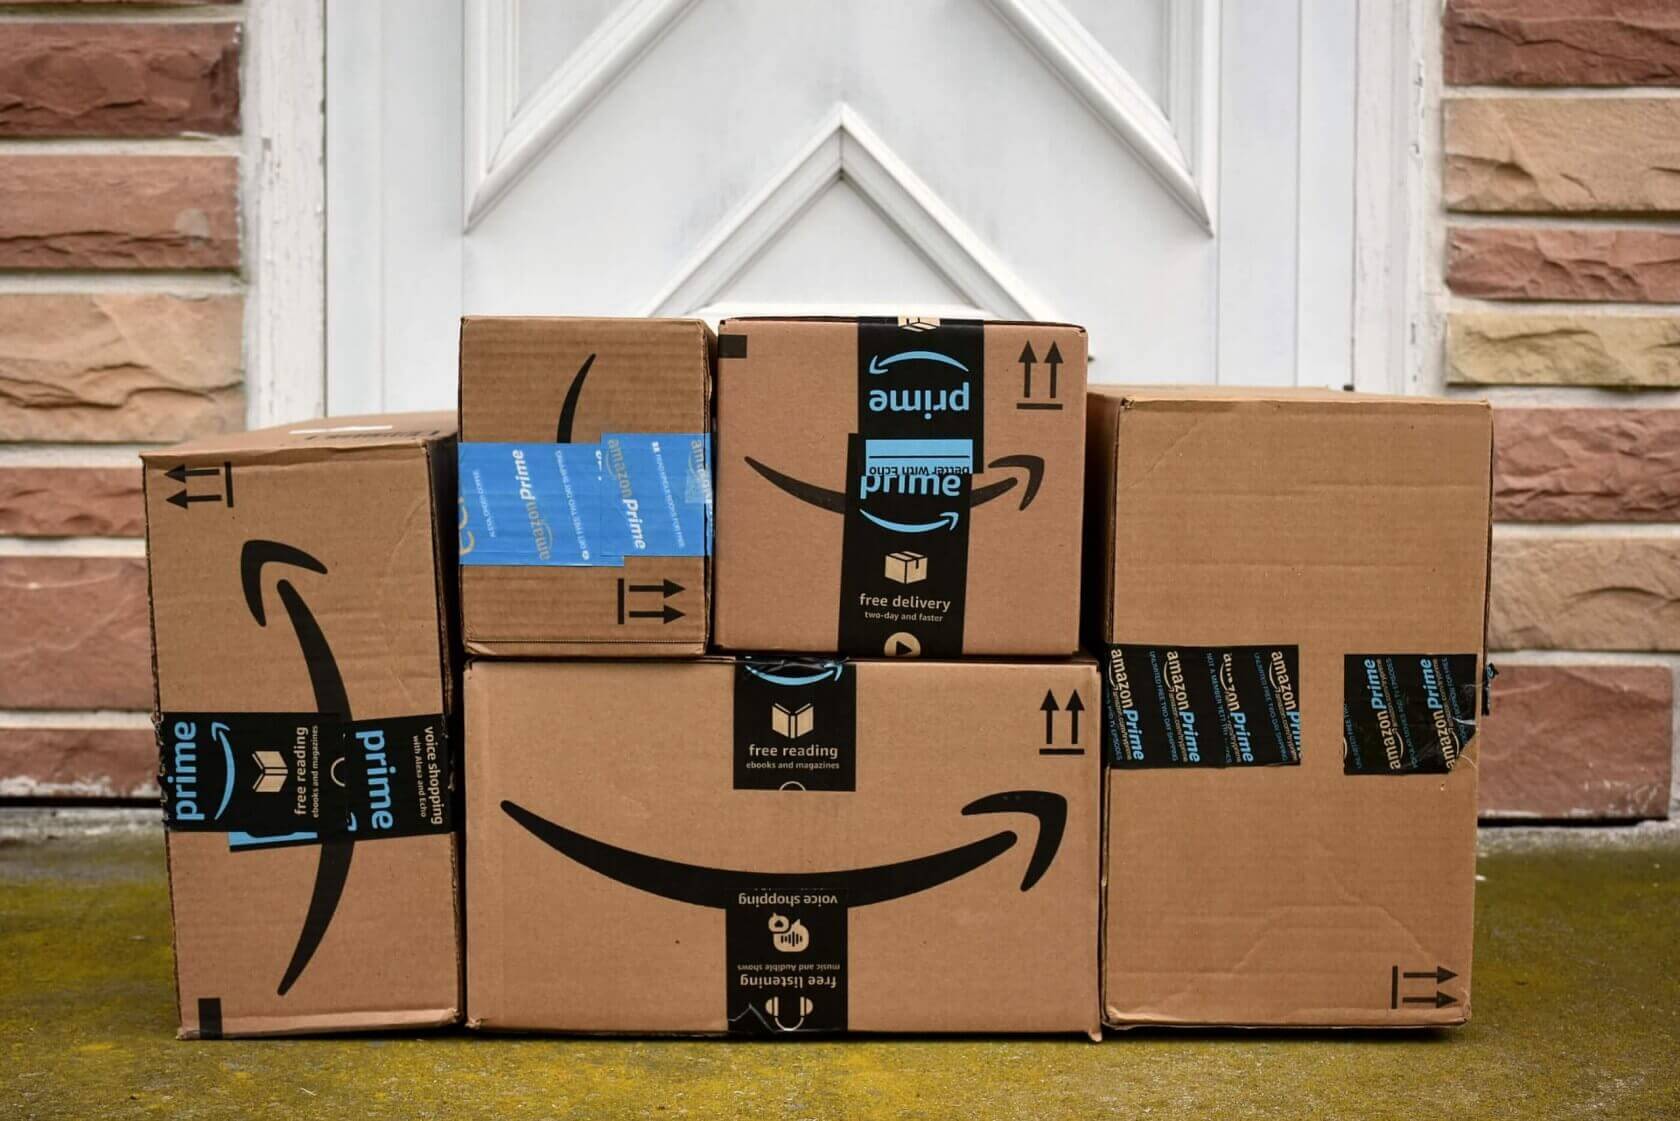 Amazon is planning an early summer sale as a prequel to Prime Day